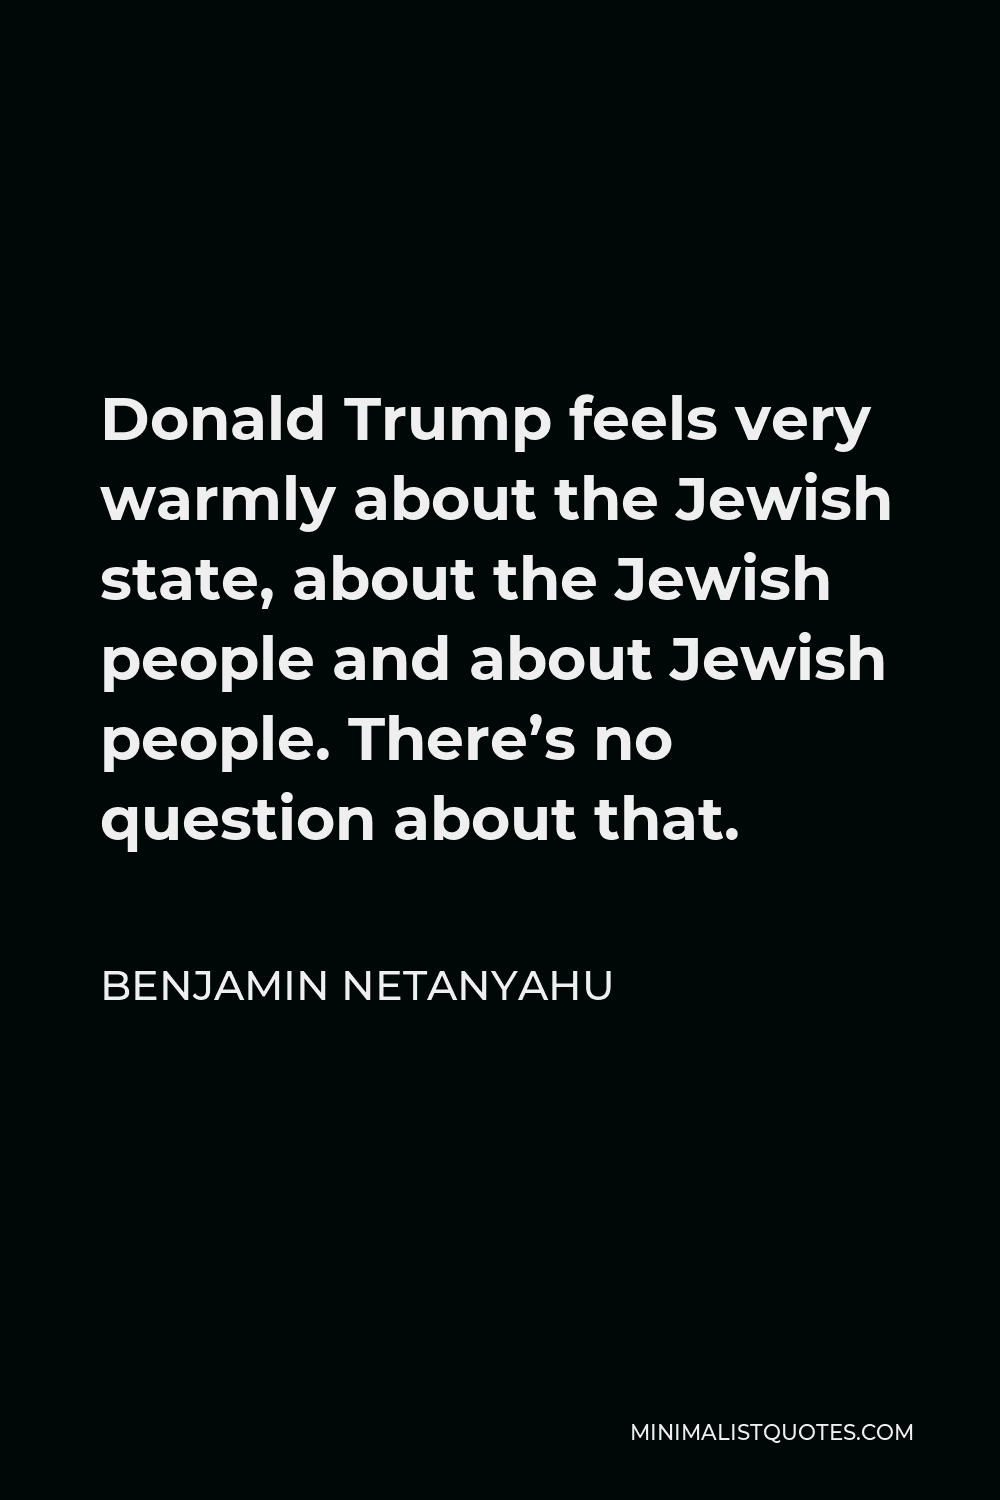 Benjamin Netanyahu Quote - Donald Trump feels very warmly about the Jewish state, about the Jewish people and about Jewish people. There’s no question about that.